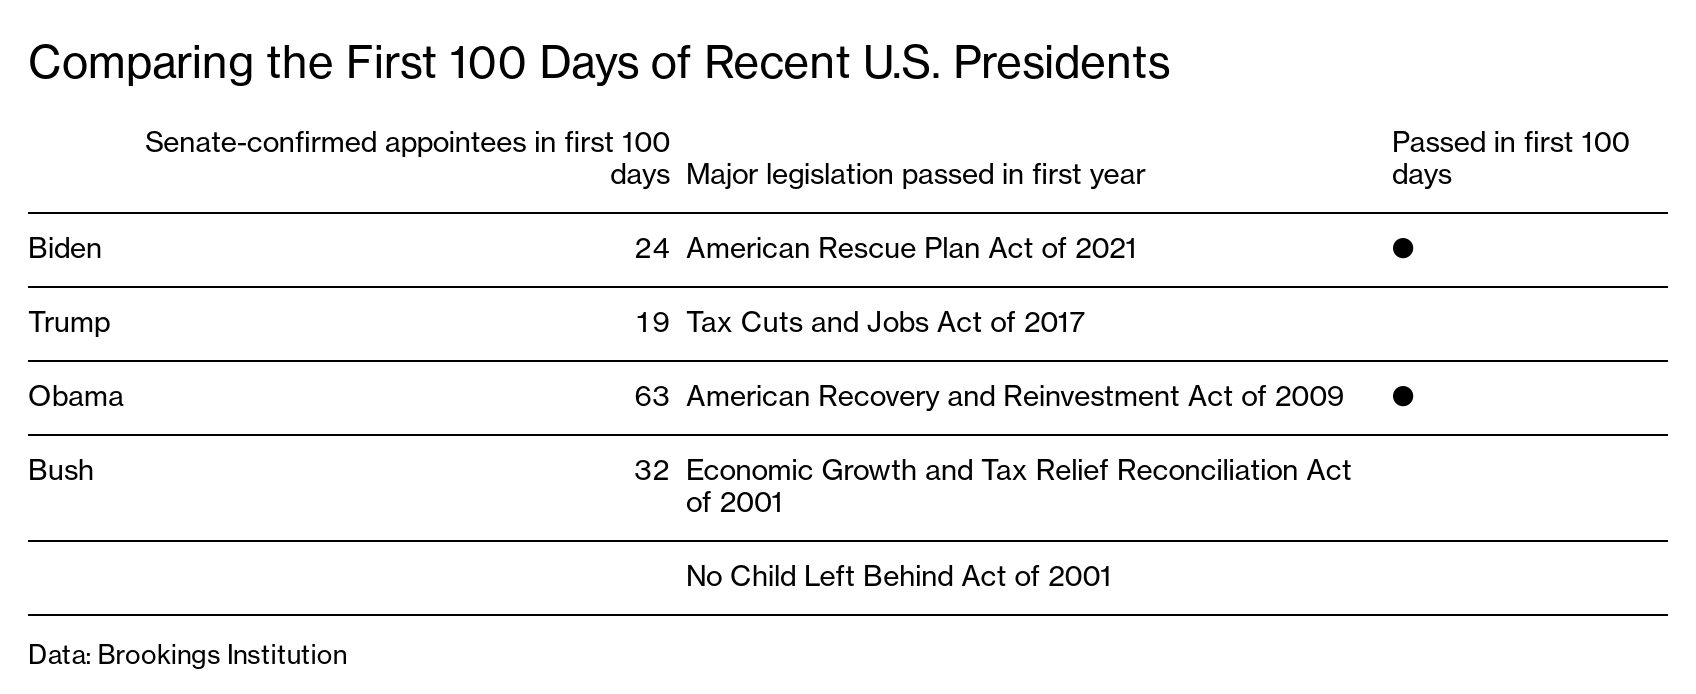 What is So Special About a US President's First 100 Days?